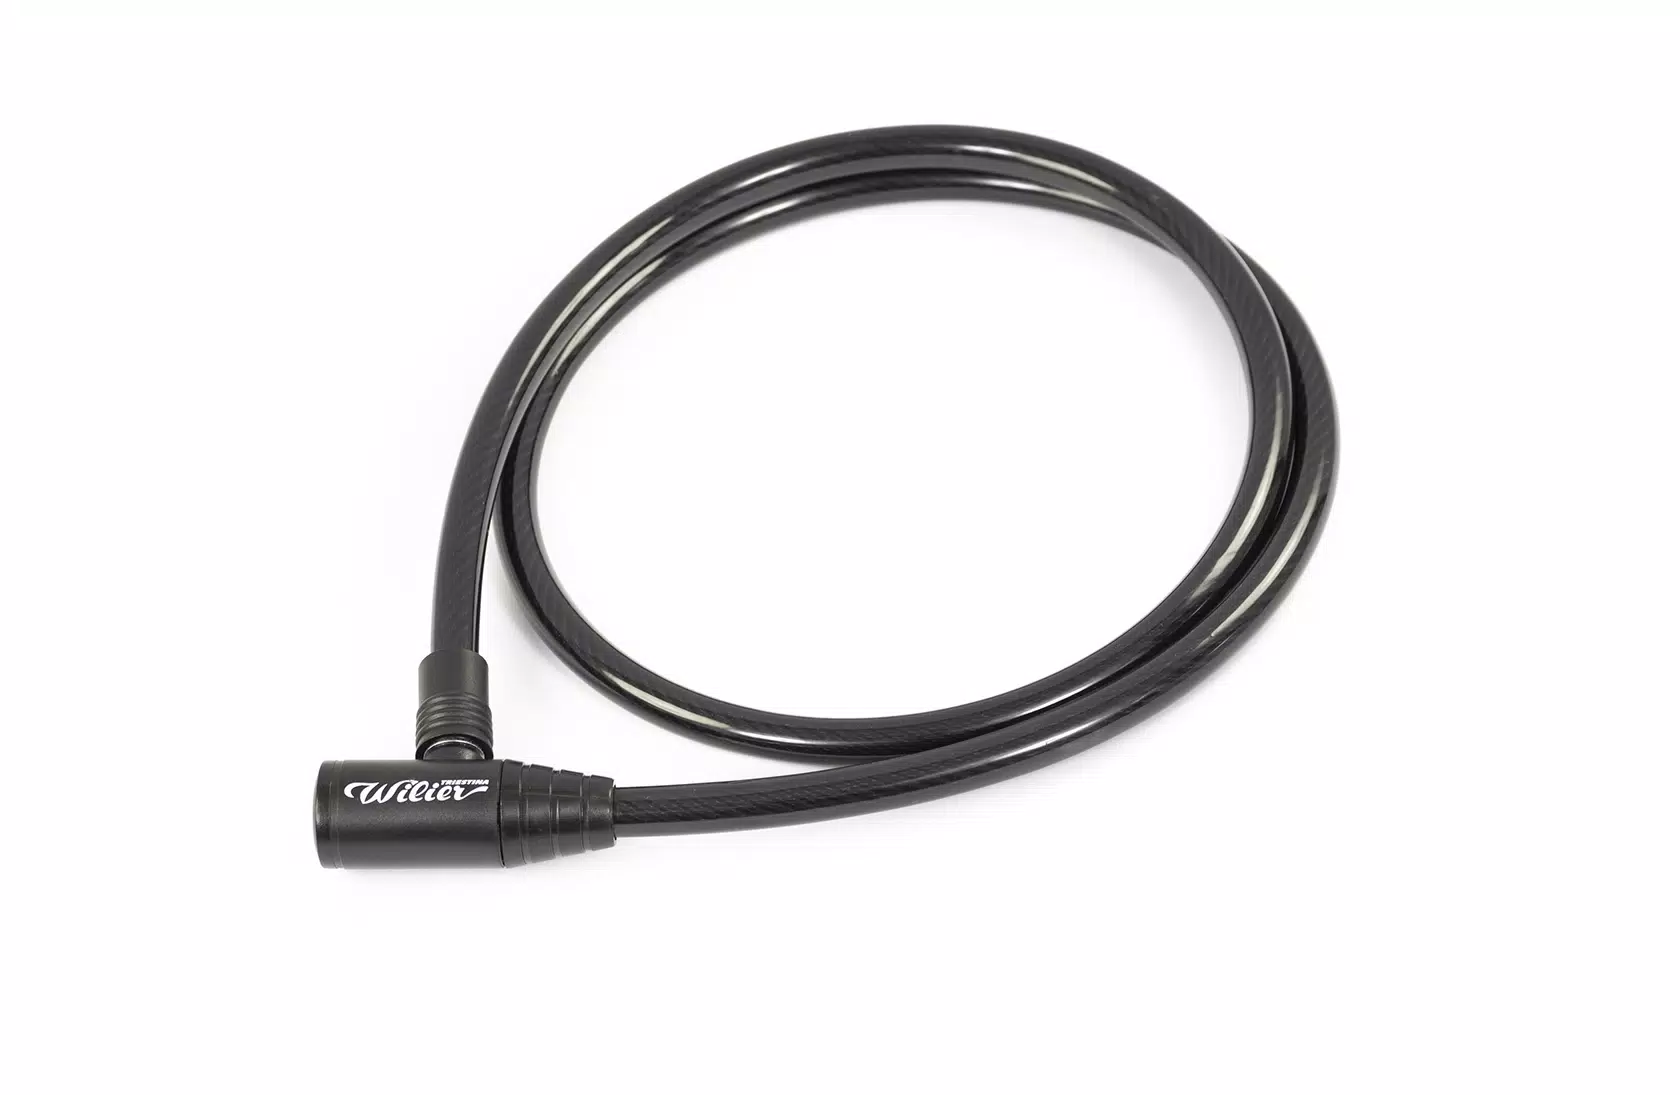 Combination Lock 10 mm reinforced cable 1,2 m